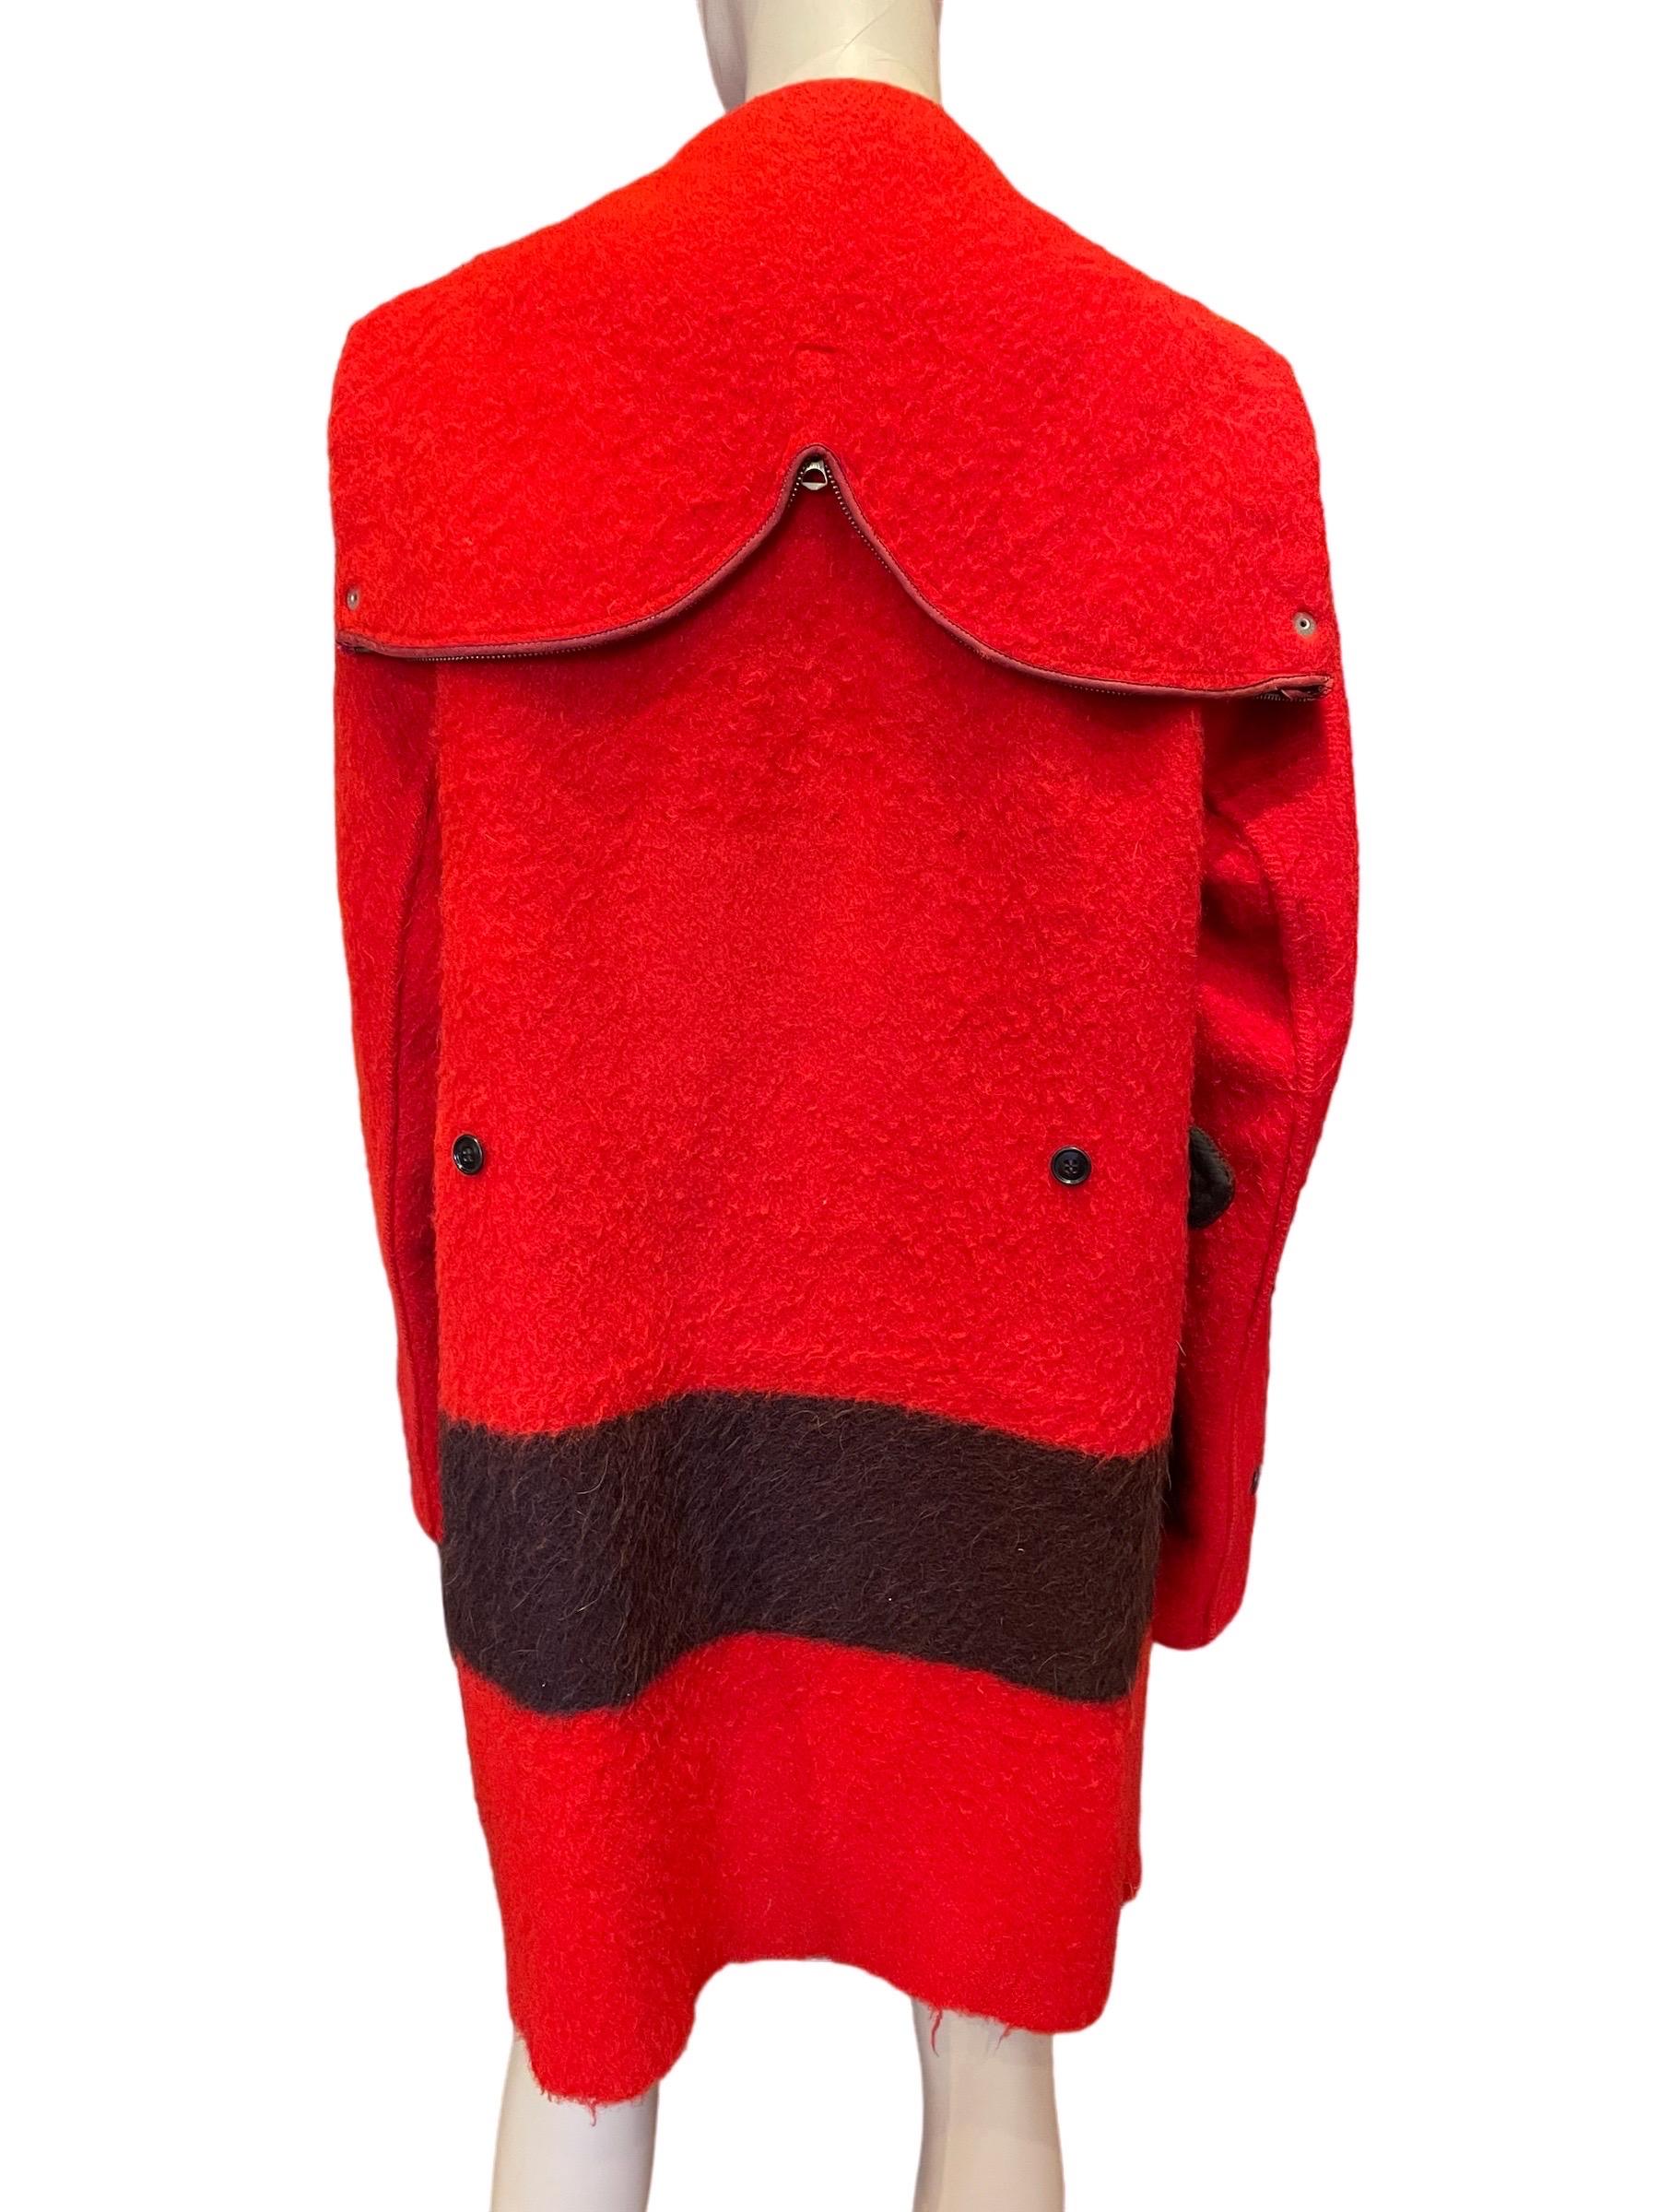 1940s Abercrombie & Fitch Crimson Red Wool Blanket Coat 

1940s Abercrombie & Fitch Crimson Red Wool Blanket Coat, with metal front zipper and zip up hood option 

Bust: 46”
Waist: 46”
Shoulder: 18”
Length: 34”
